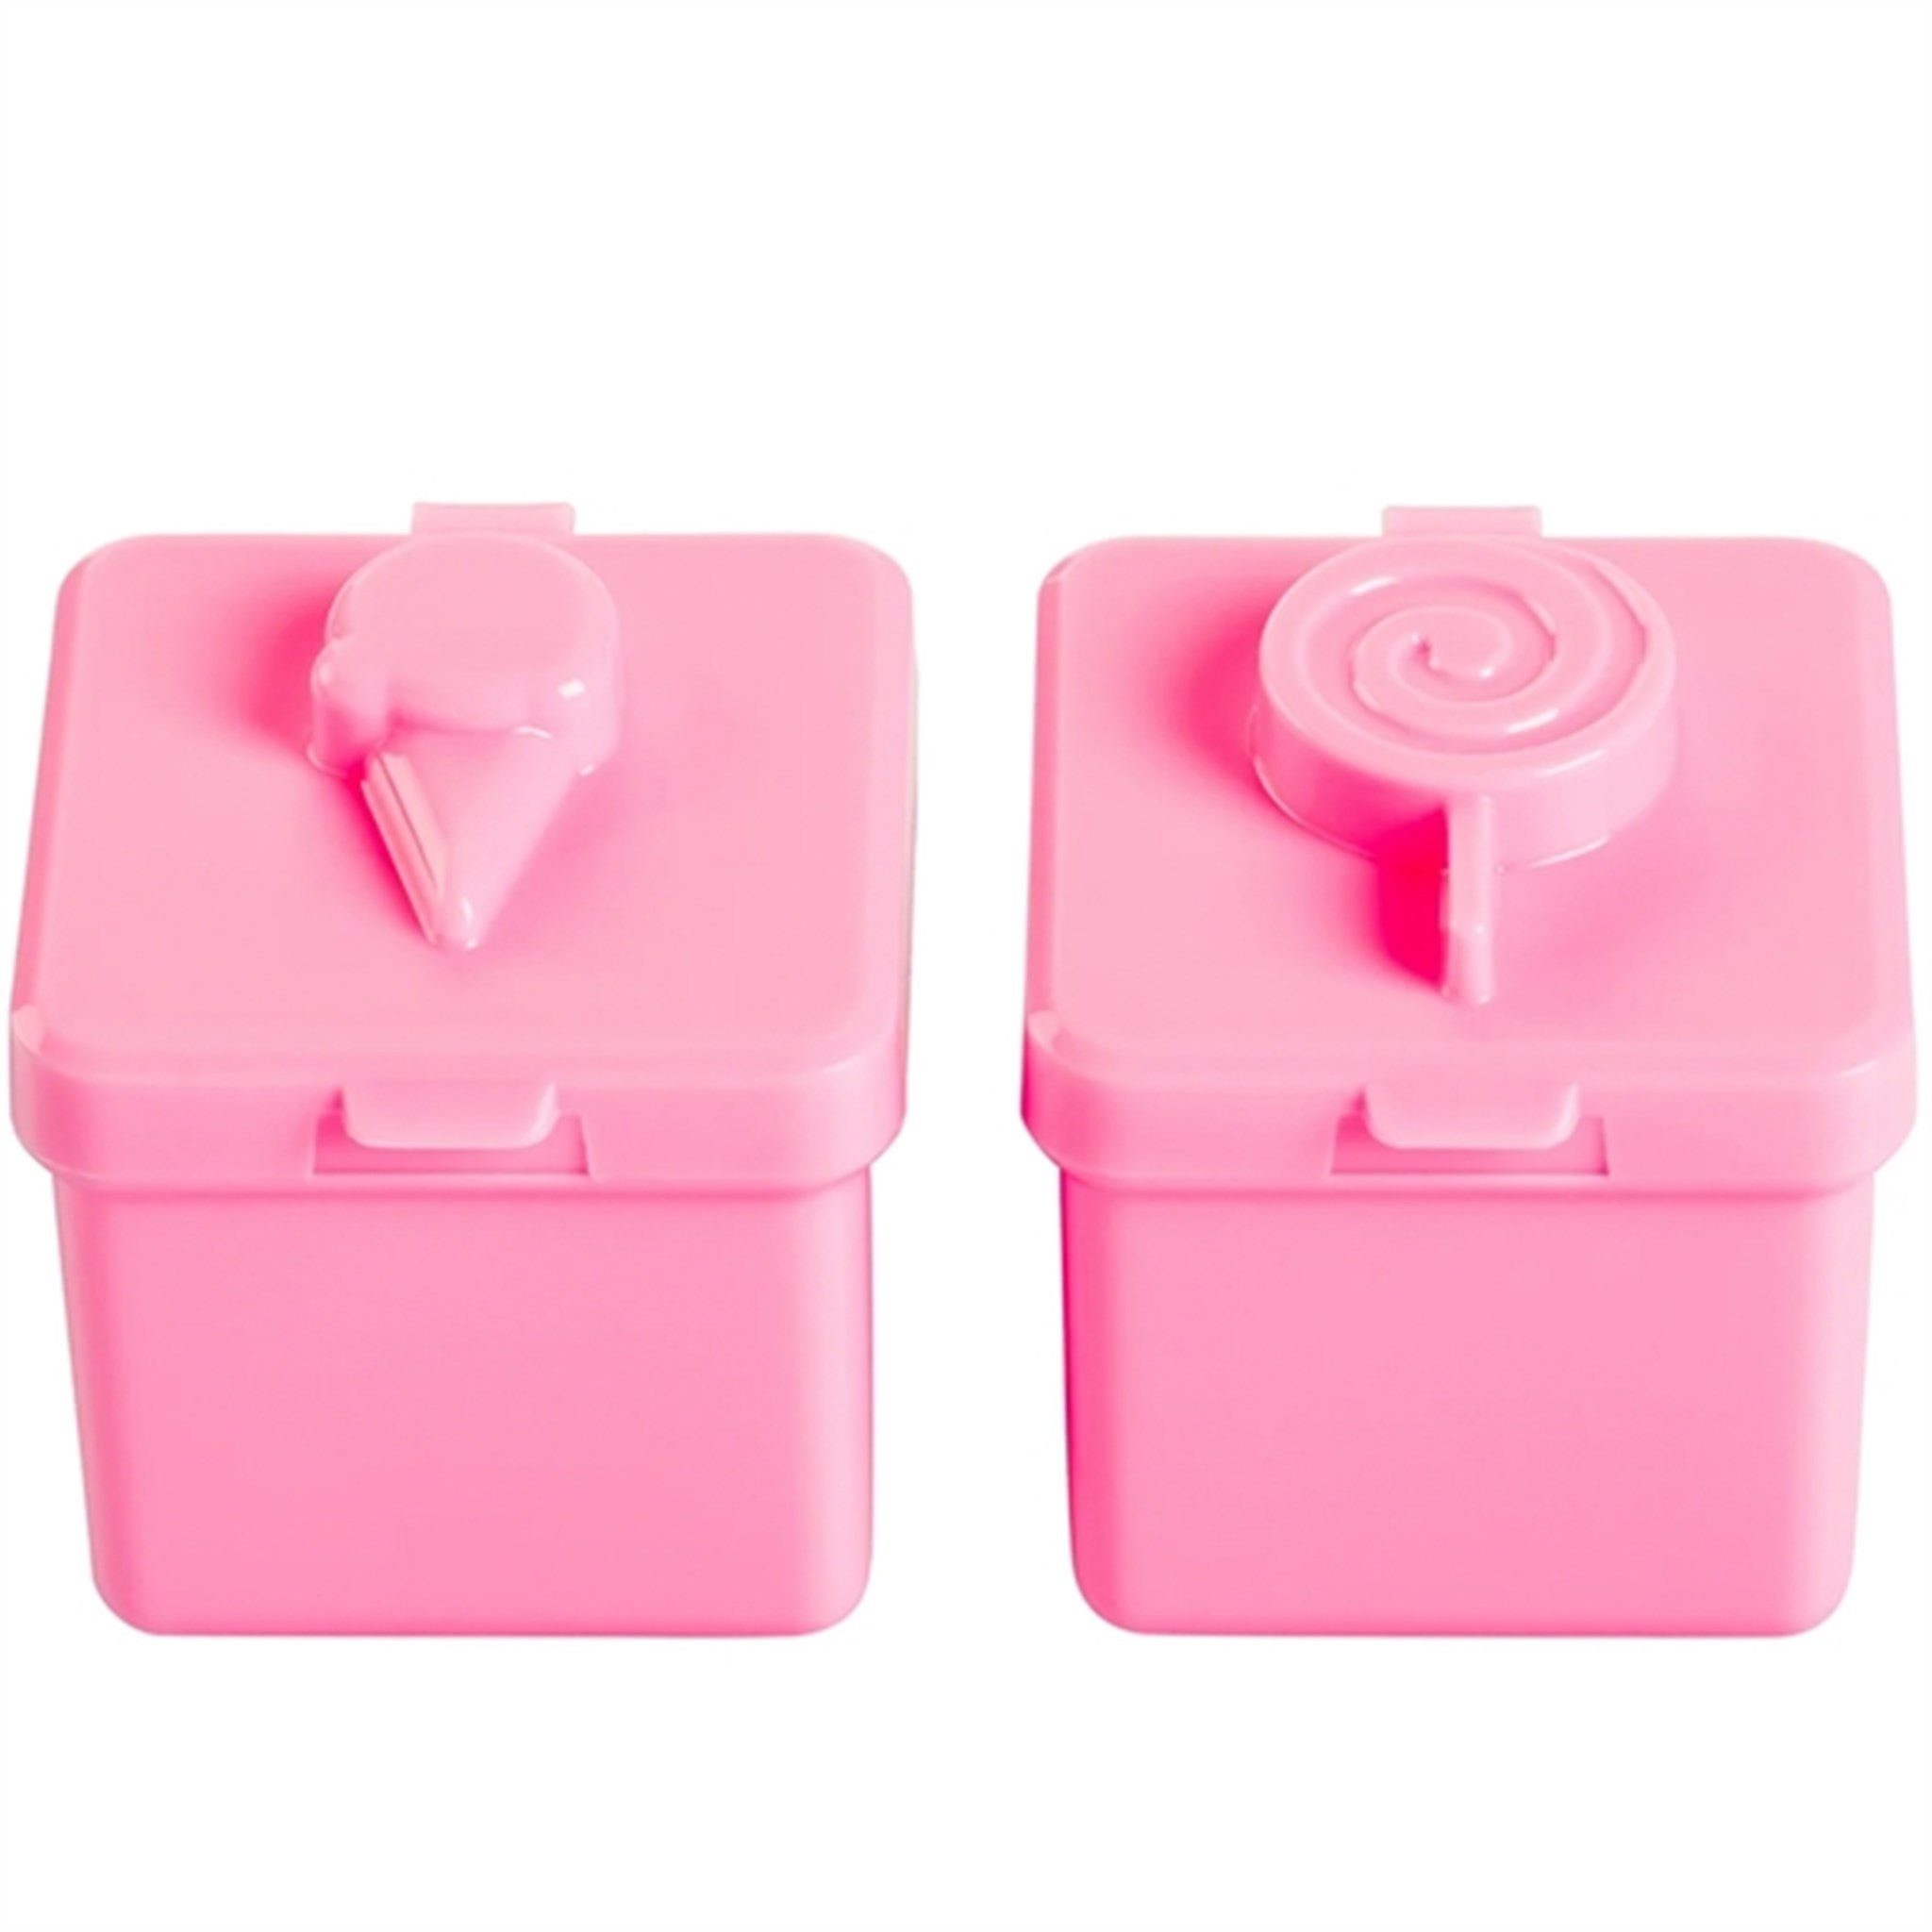 Little Lunch Box Co Bento Surprise Box Pink Sweets